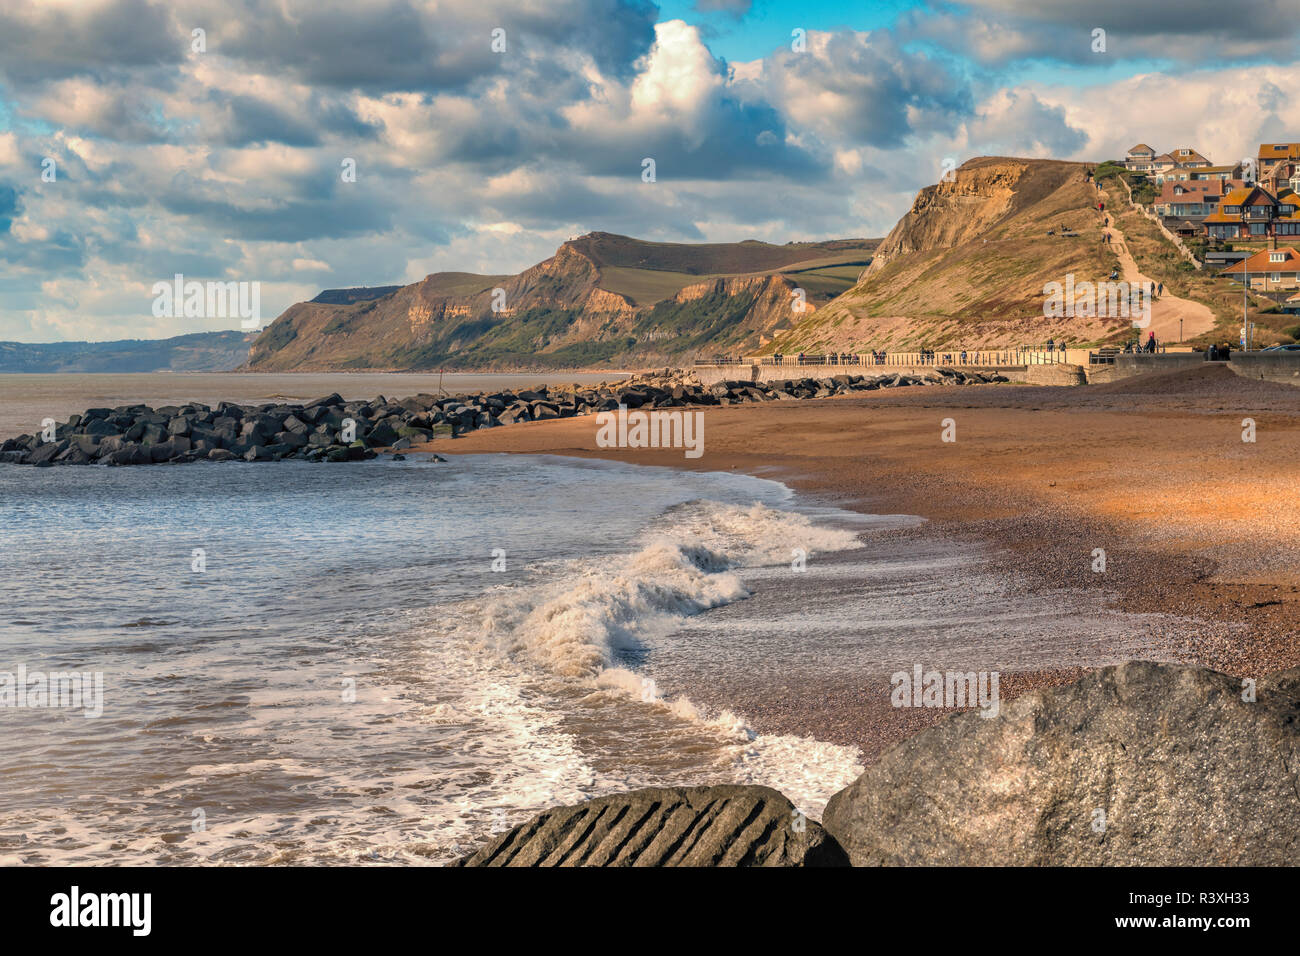 On a sunny afternoon on the Jurassic coast, a family watch the waves break onto the beautiful beach at West Bay in Dorset. Stock Photo